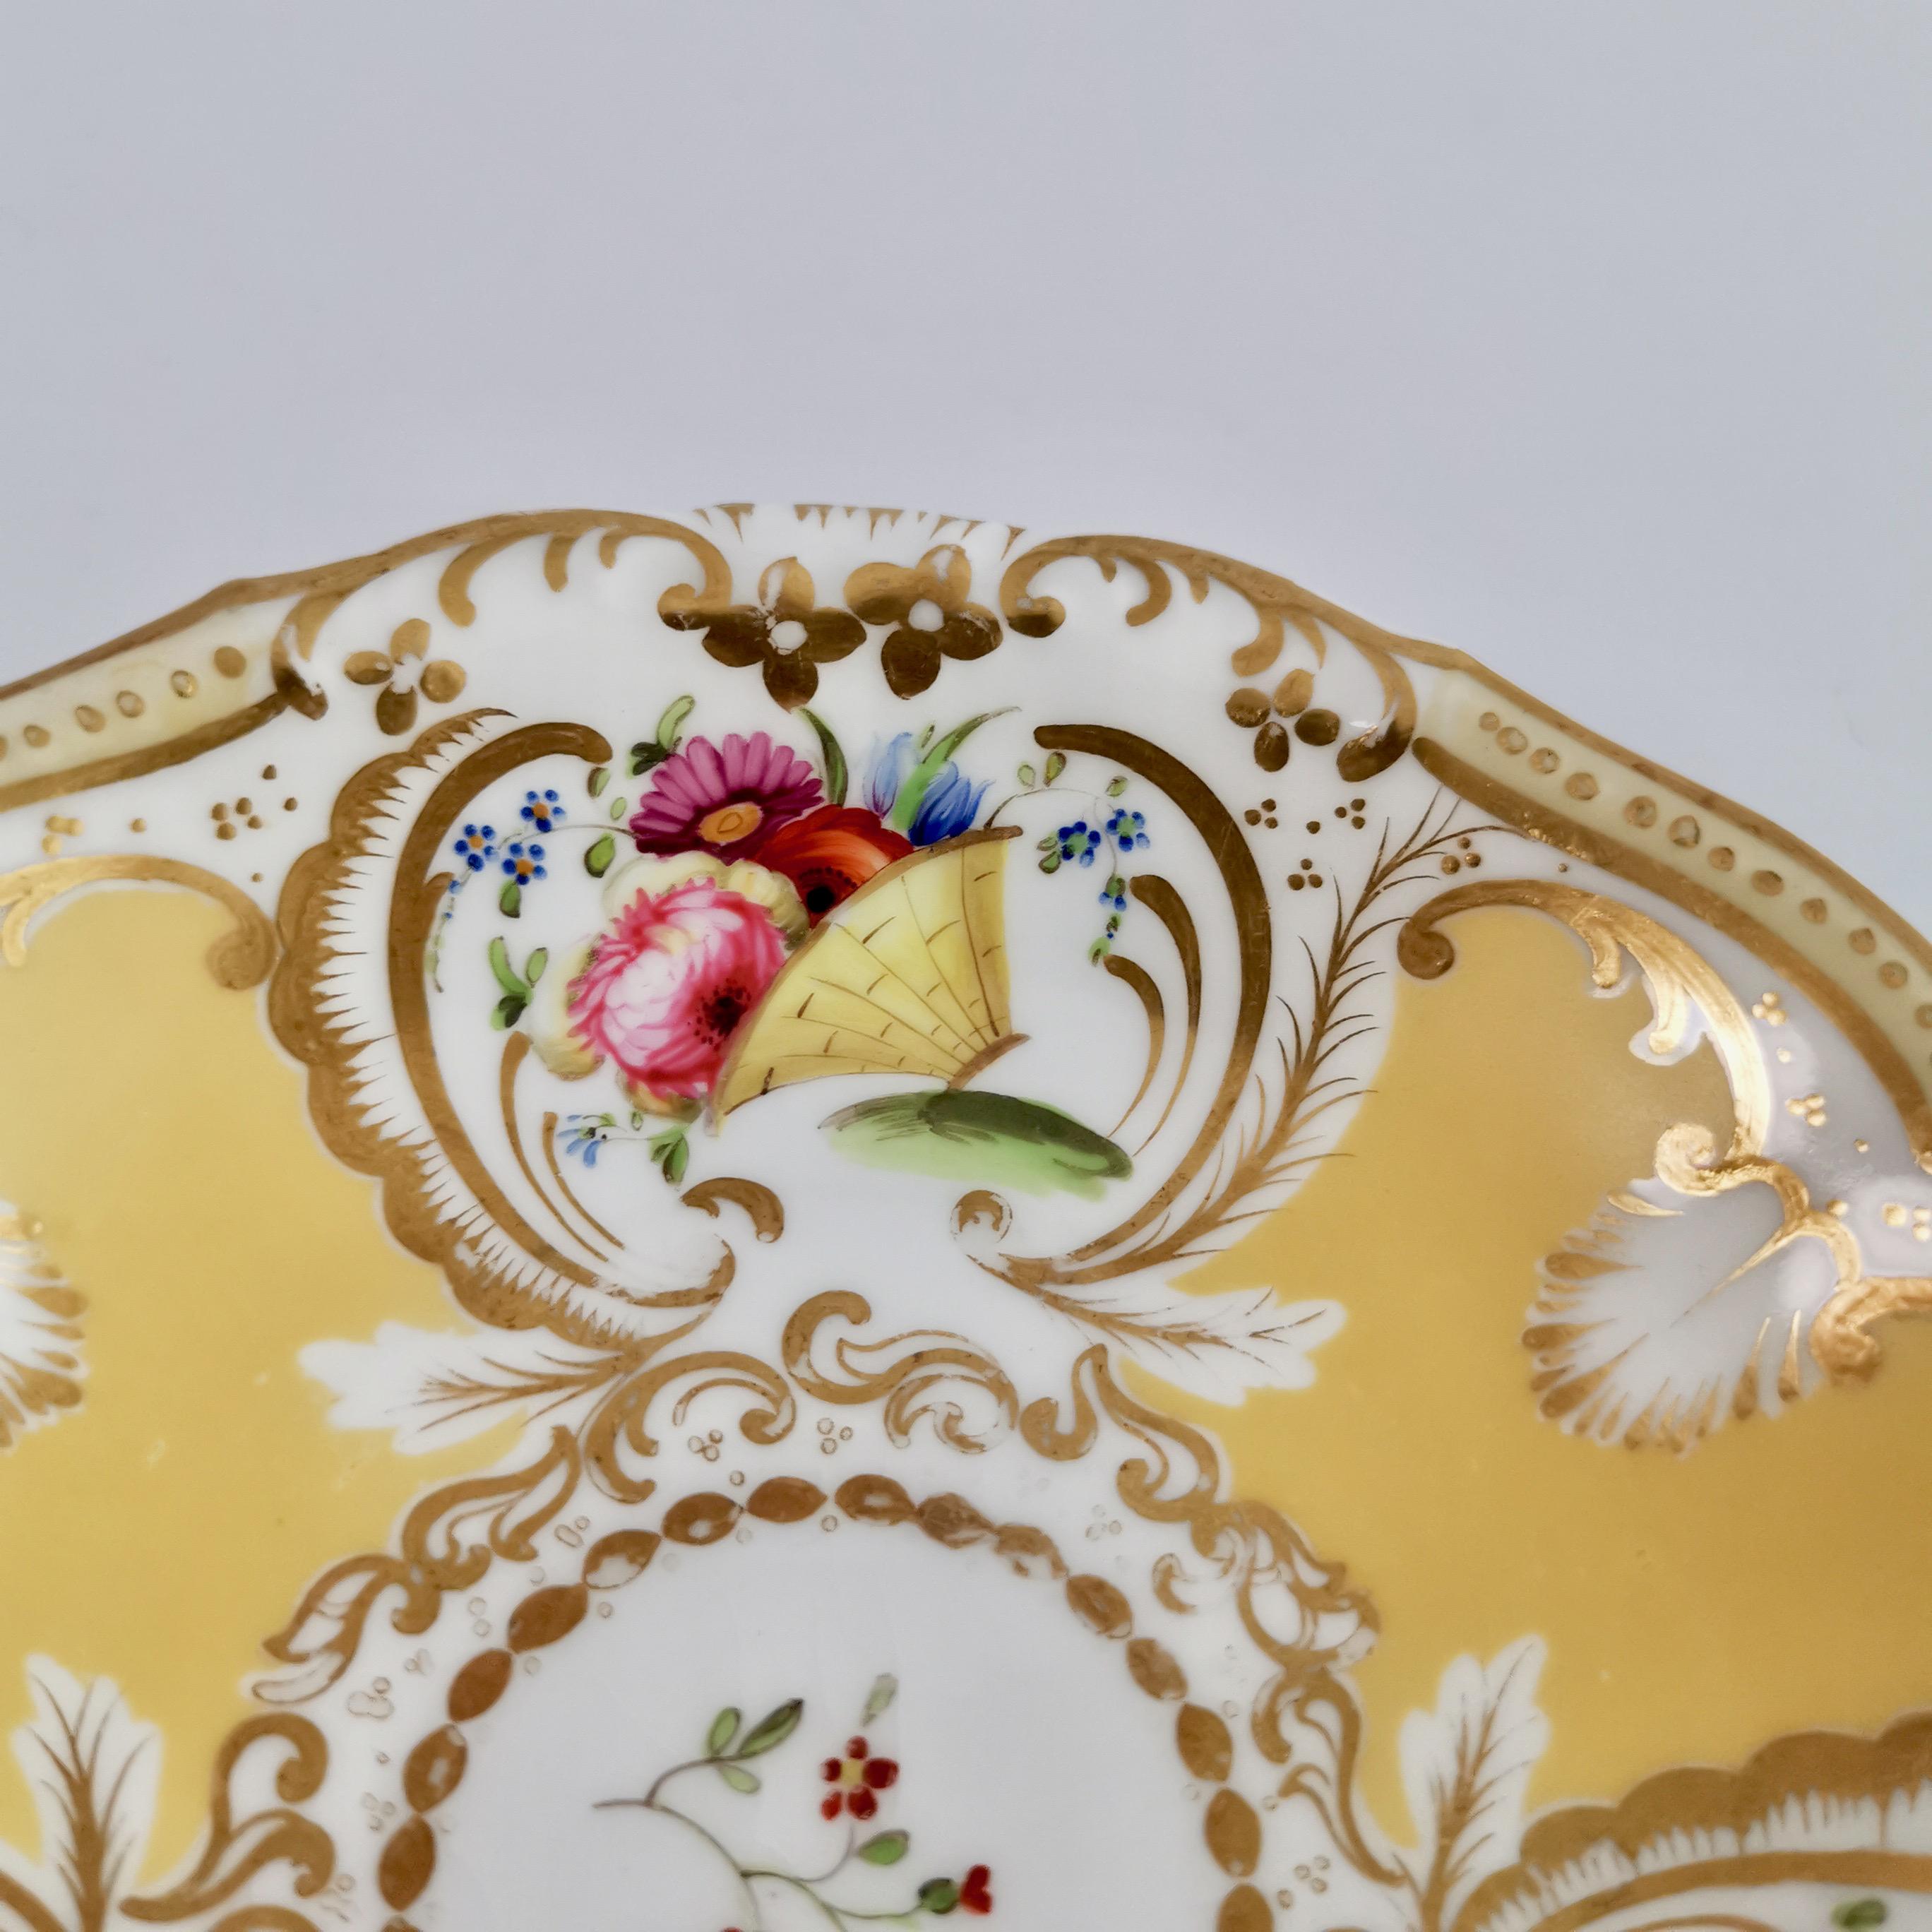 Grainger Worcester Teacup, Yellow, Gilt and Flowers, Rococo Revival, circa 1835 5